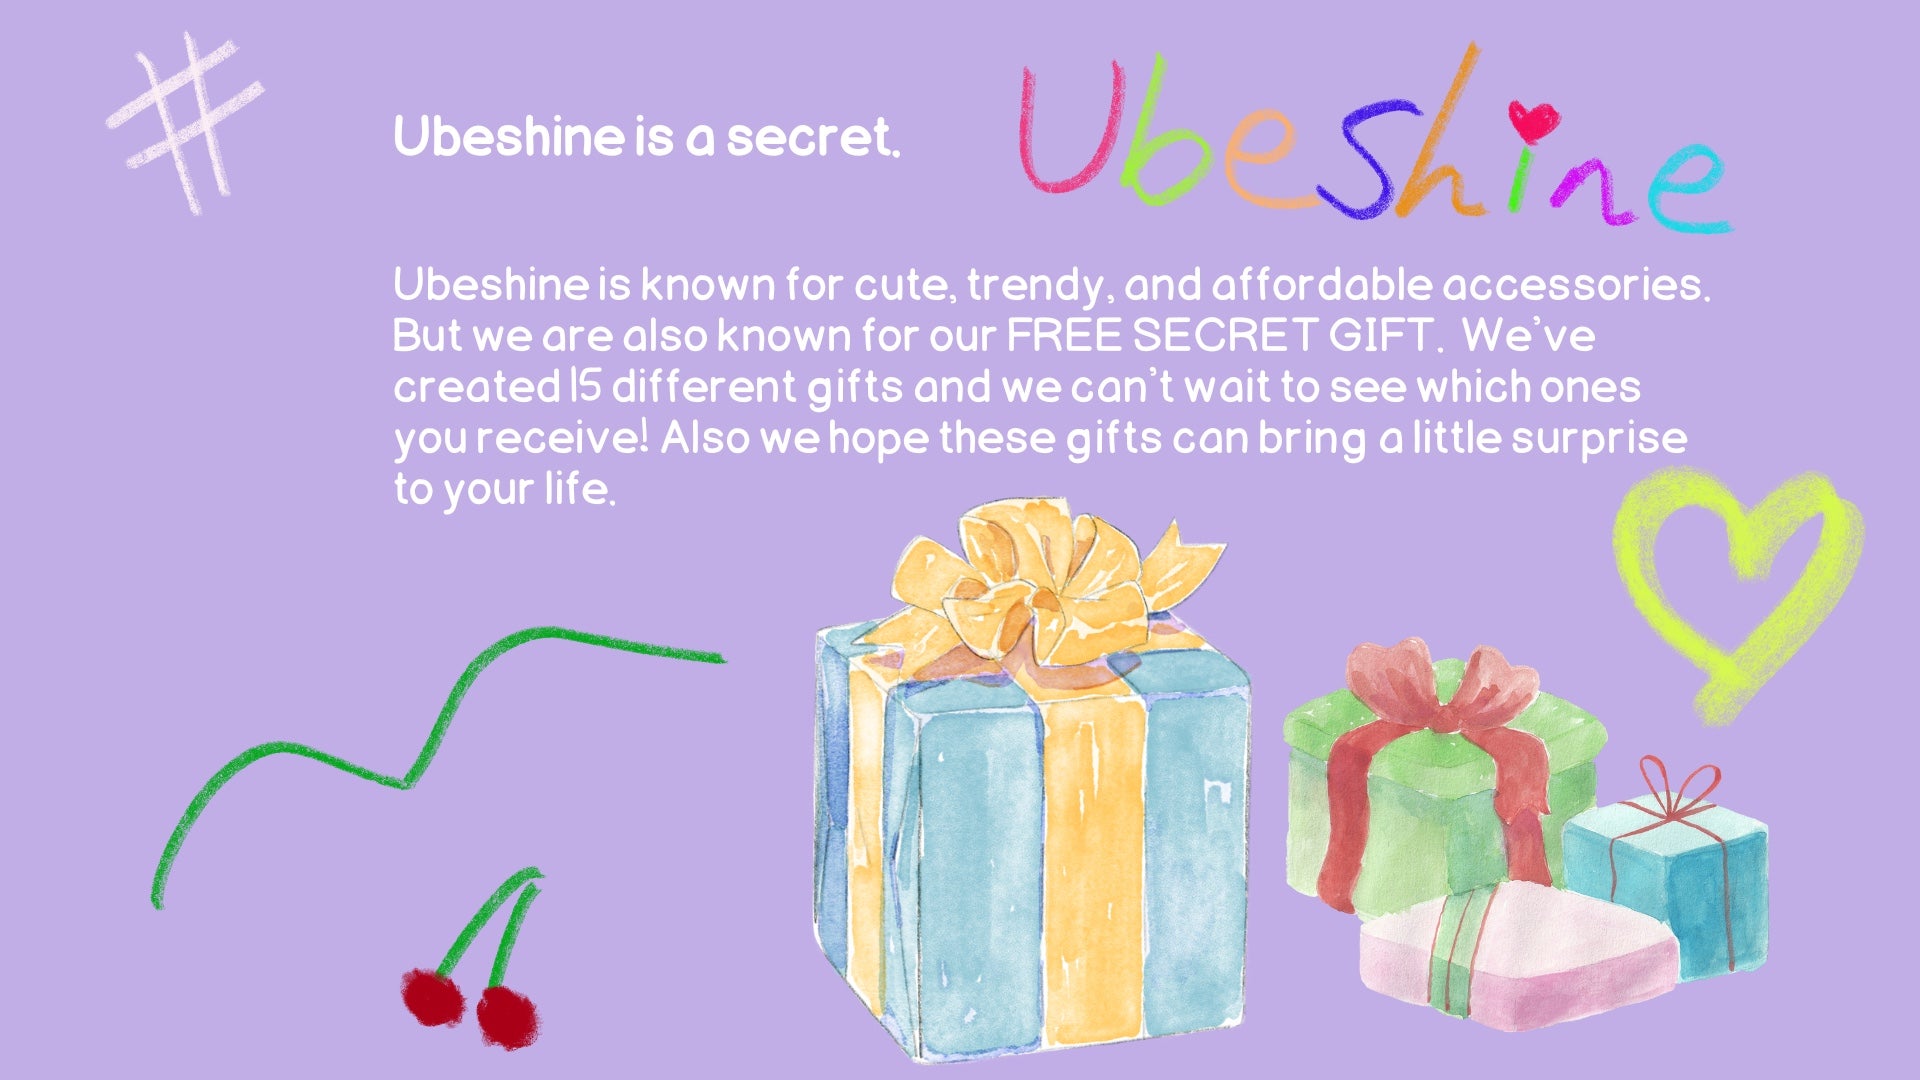 Ubeshine is a secret? Ubeshine is known for cute, trendy, and affordable accessories. But we are also known for our FREE SECRET GIFT.  I've created 15different gifts and I can't wait to see which ones you receive! Also I hope these gifts can bring a little surprise to your life.